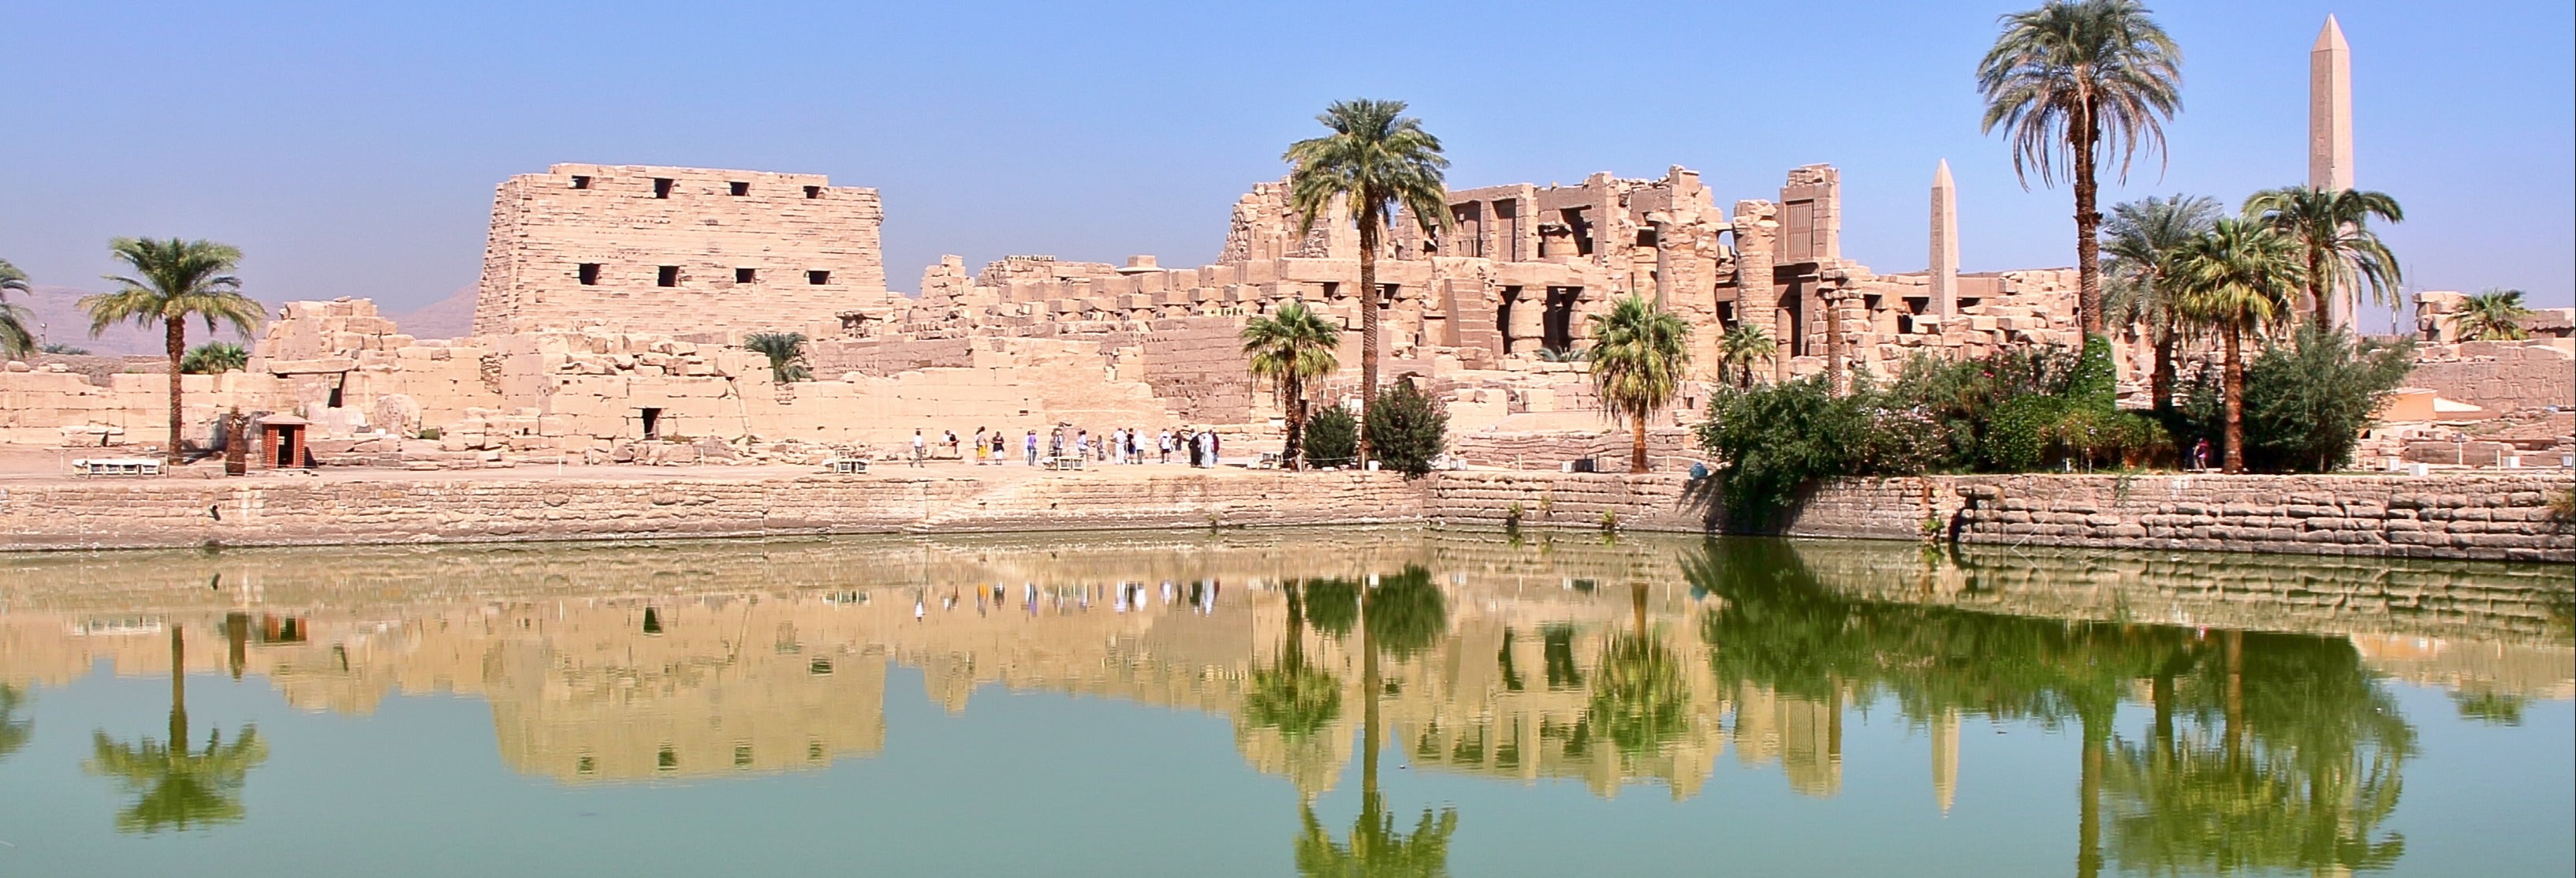 Guided Tour of Luxor and Karnak Temples